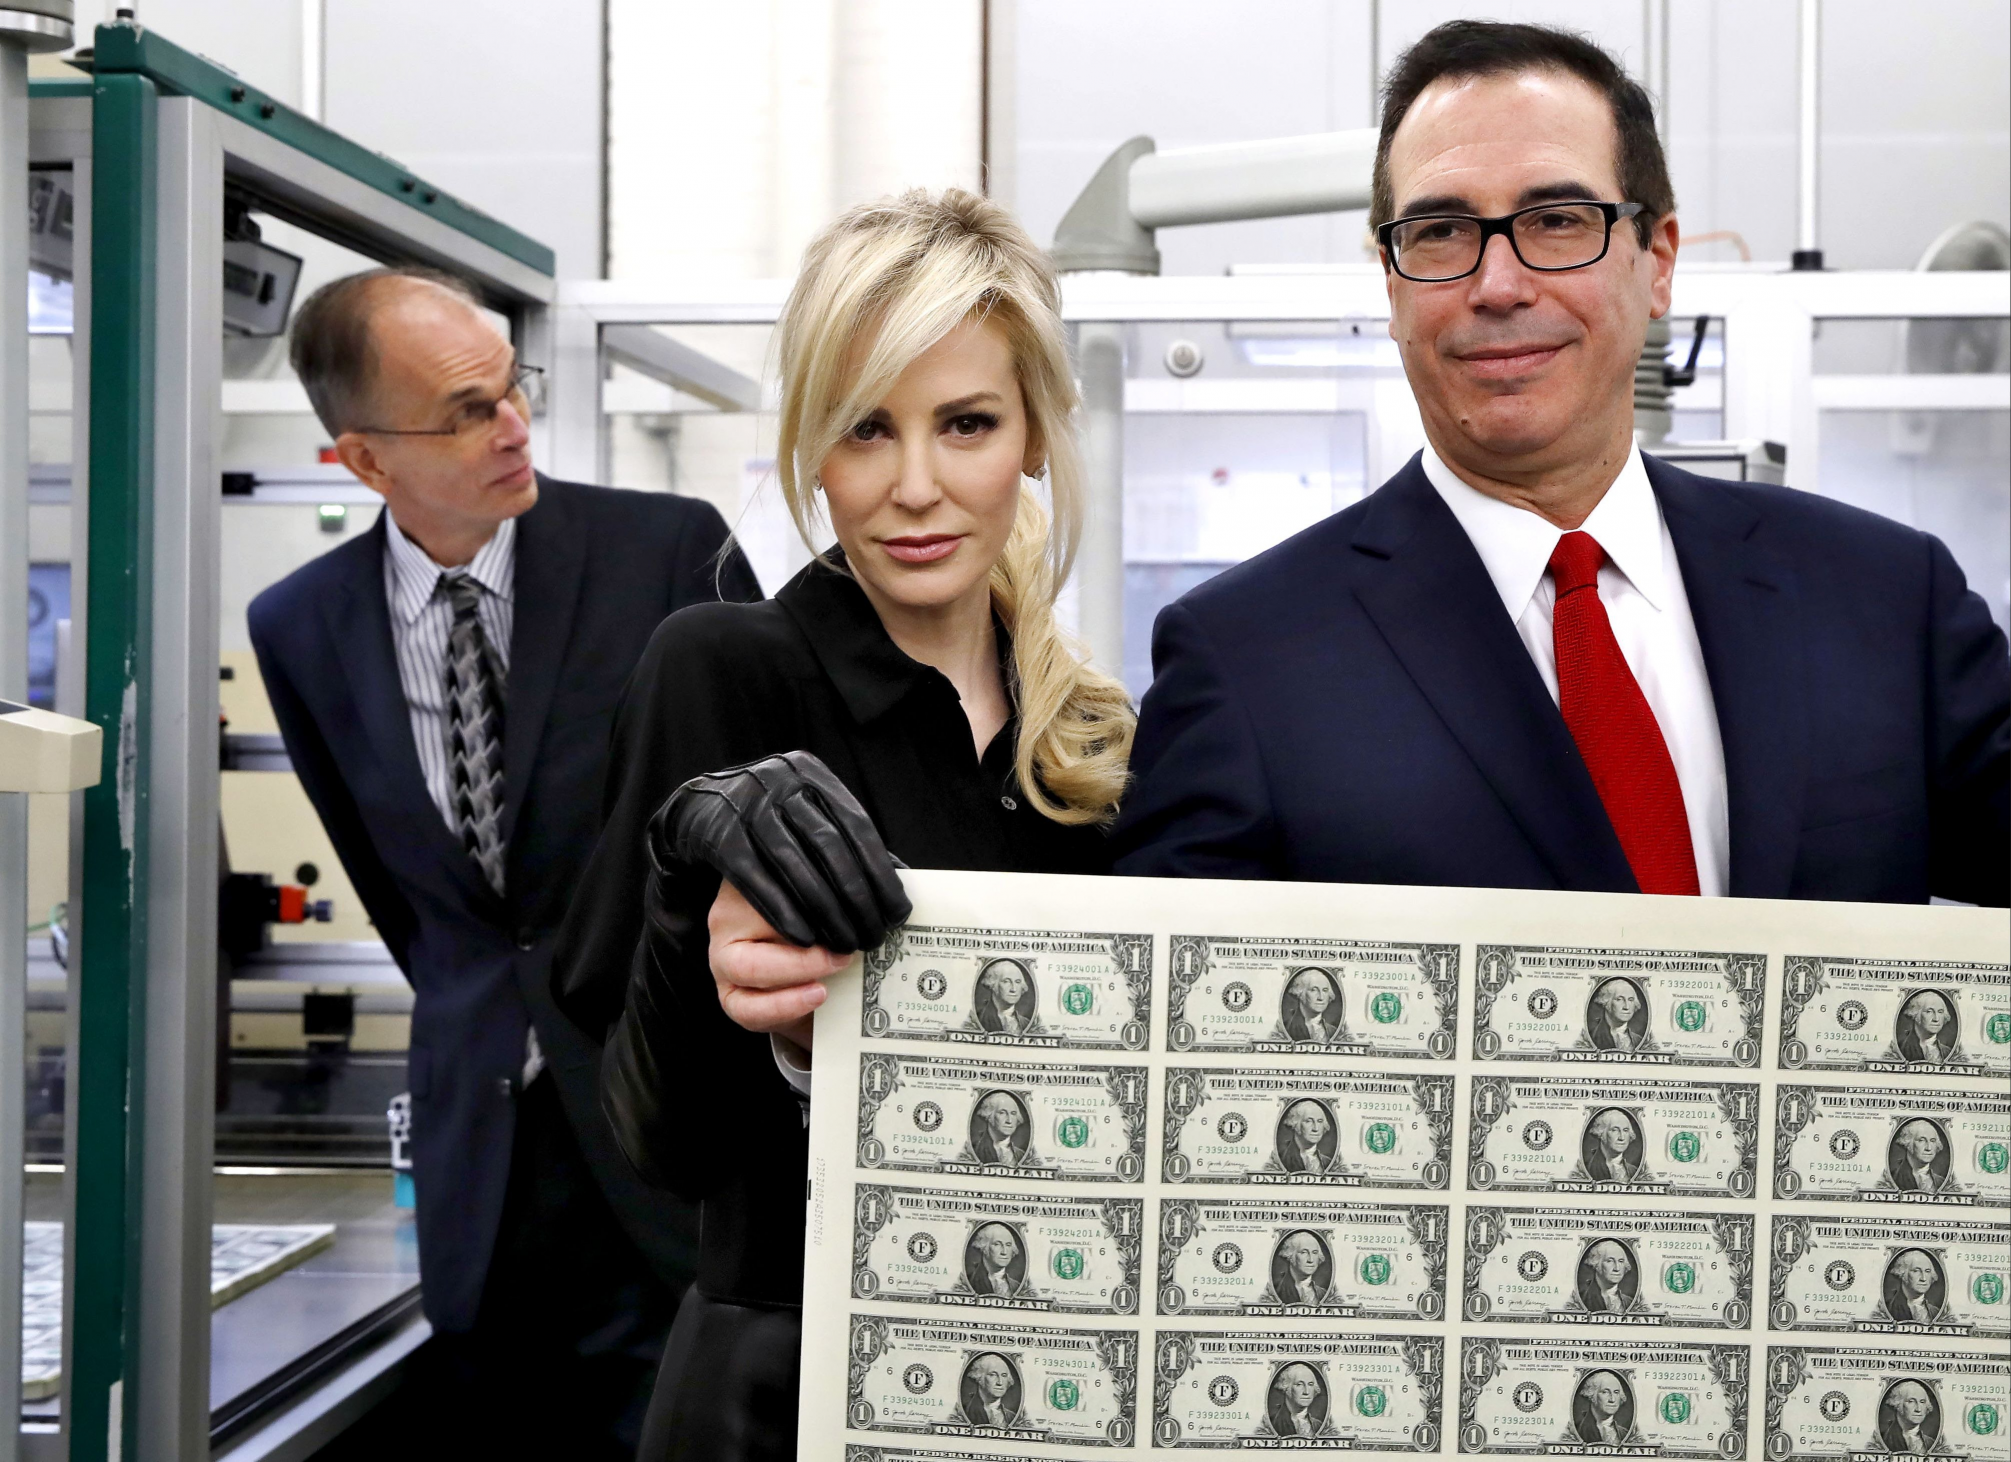 Louise Linton And Steve Mnuchin At Treasury with sheet of Money Blank Meme Template